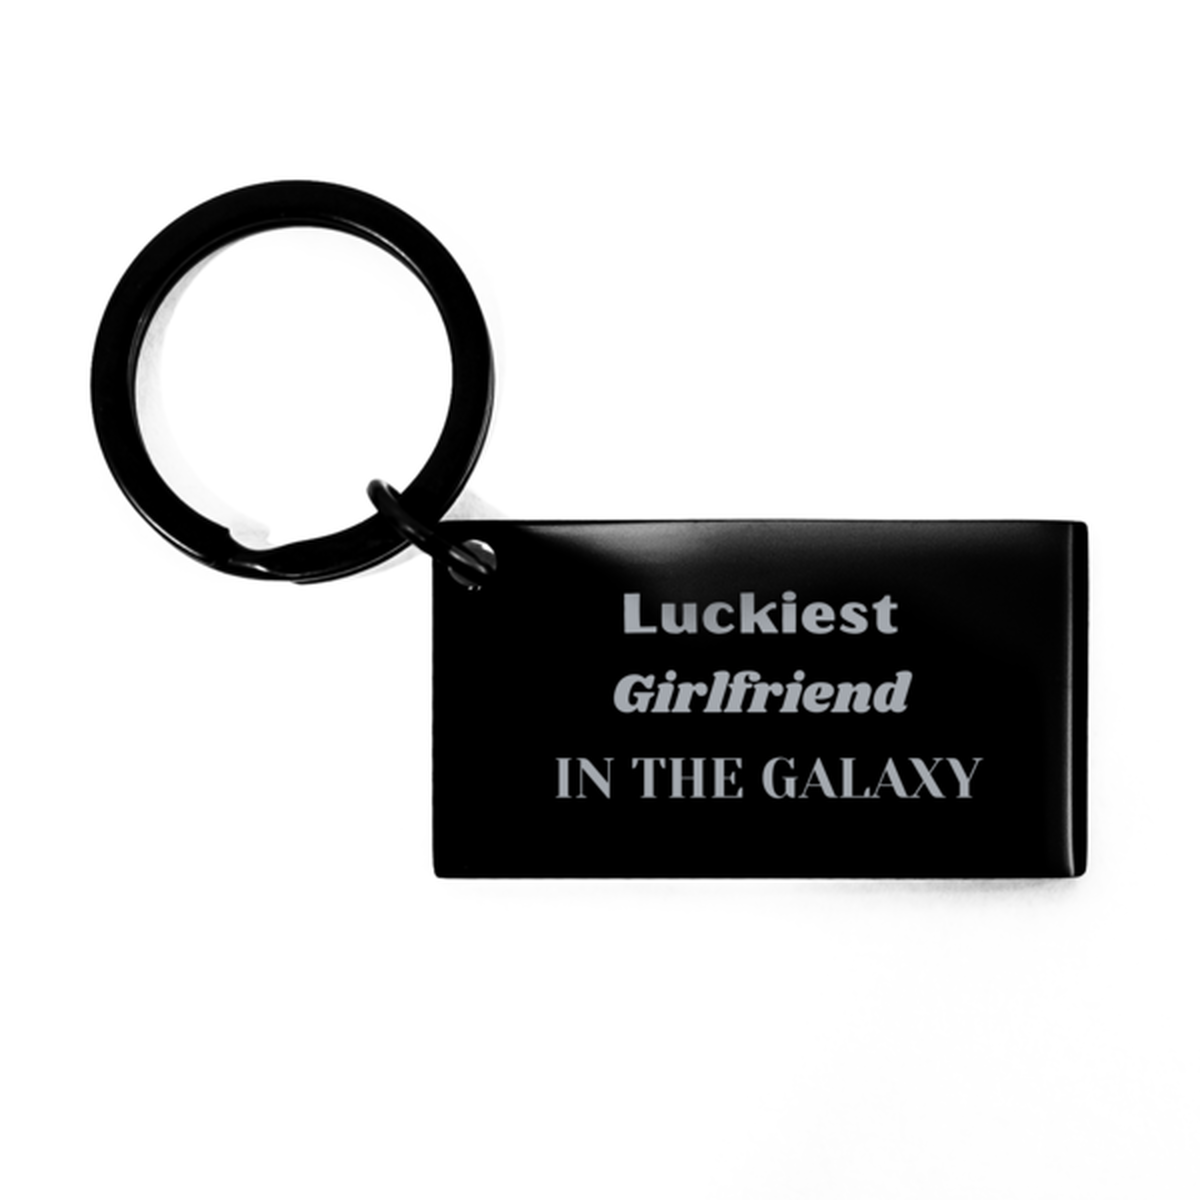 Luckiest Girlfriend in the Galaxy, To My Girlfriend Engraved Gifts, Christmas Girlfriend Keychain Gifts, X-mas Birthday Unique Gifts For Girlfriend Men Women